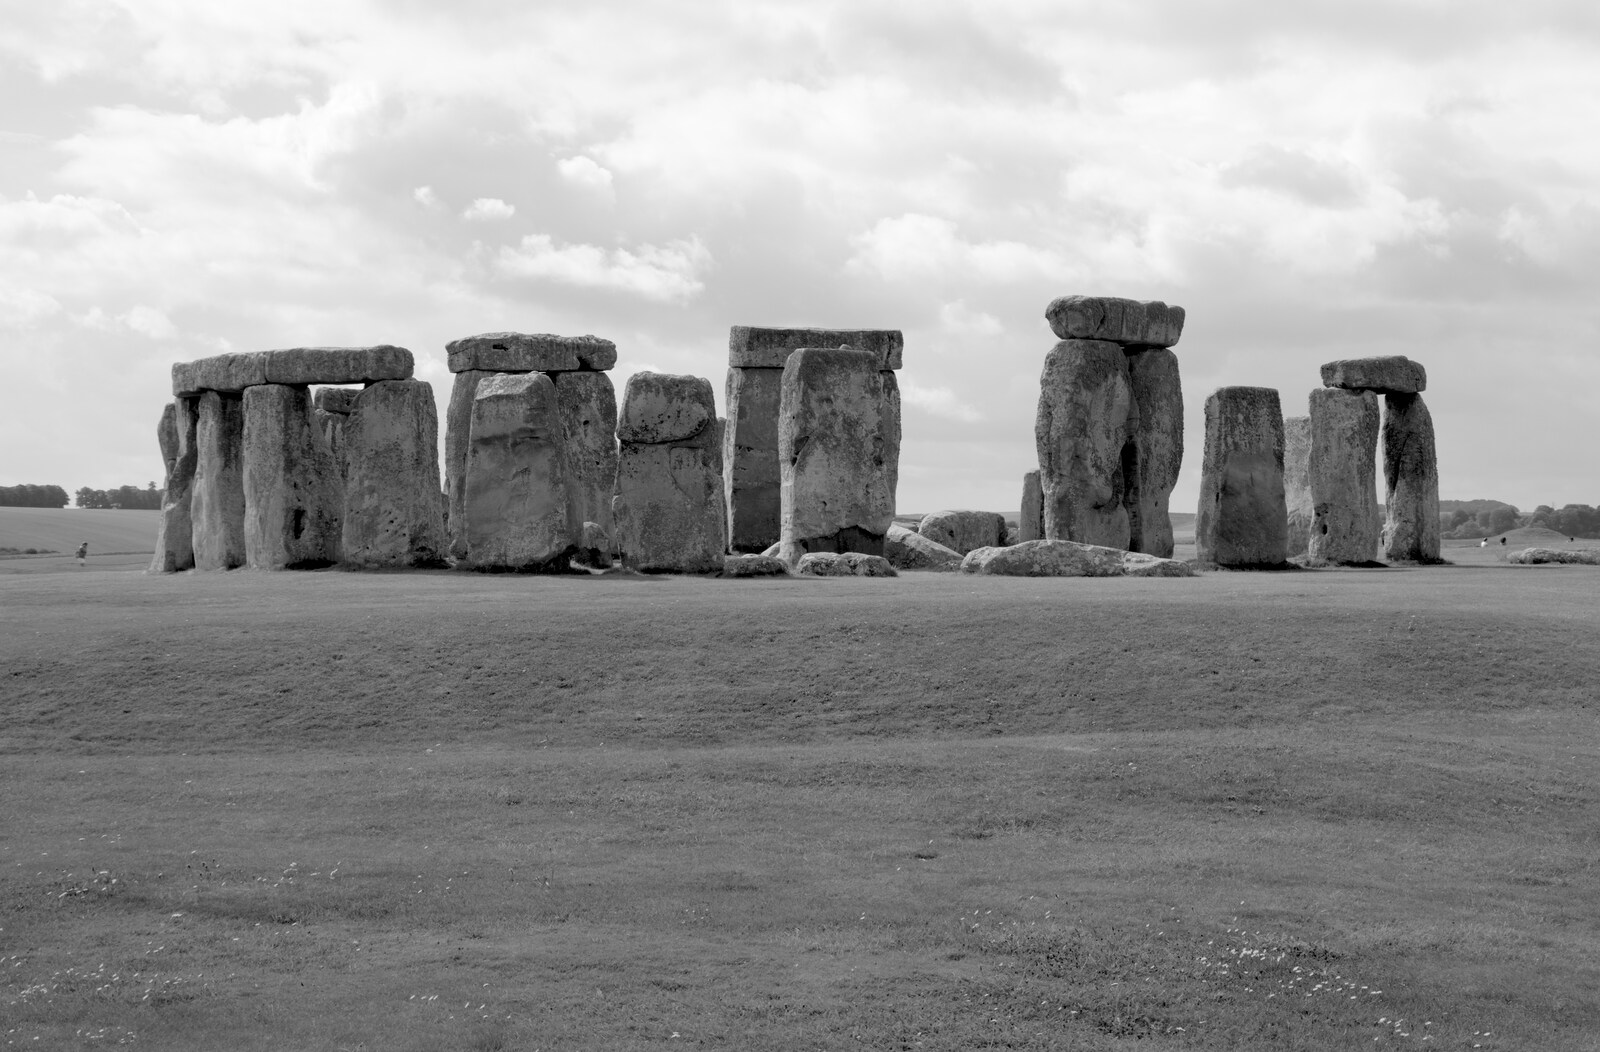 Stonehenge in black-and-white from Stone Circles: Stonehenge and Avebury, Wiltshire - 22nd August 2020